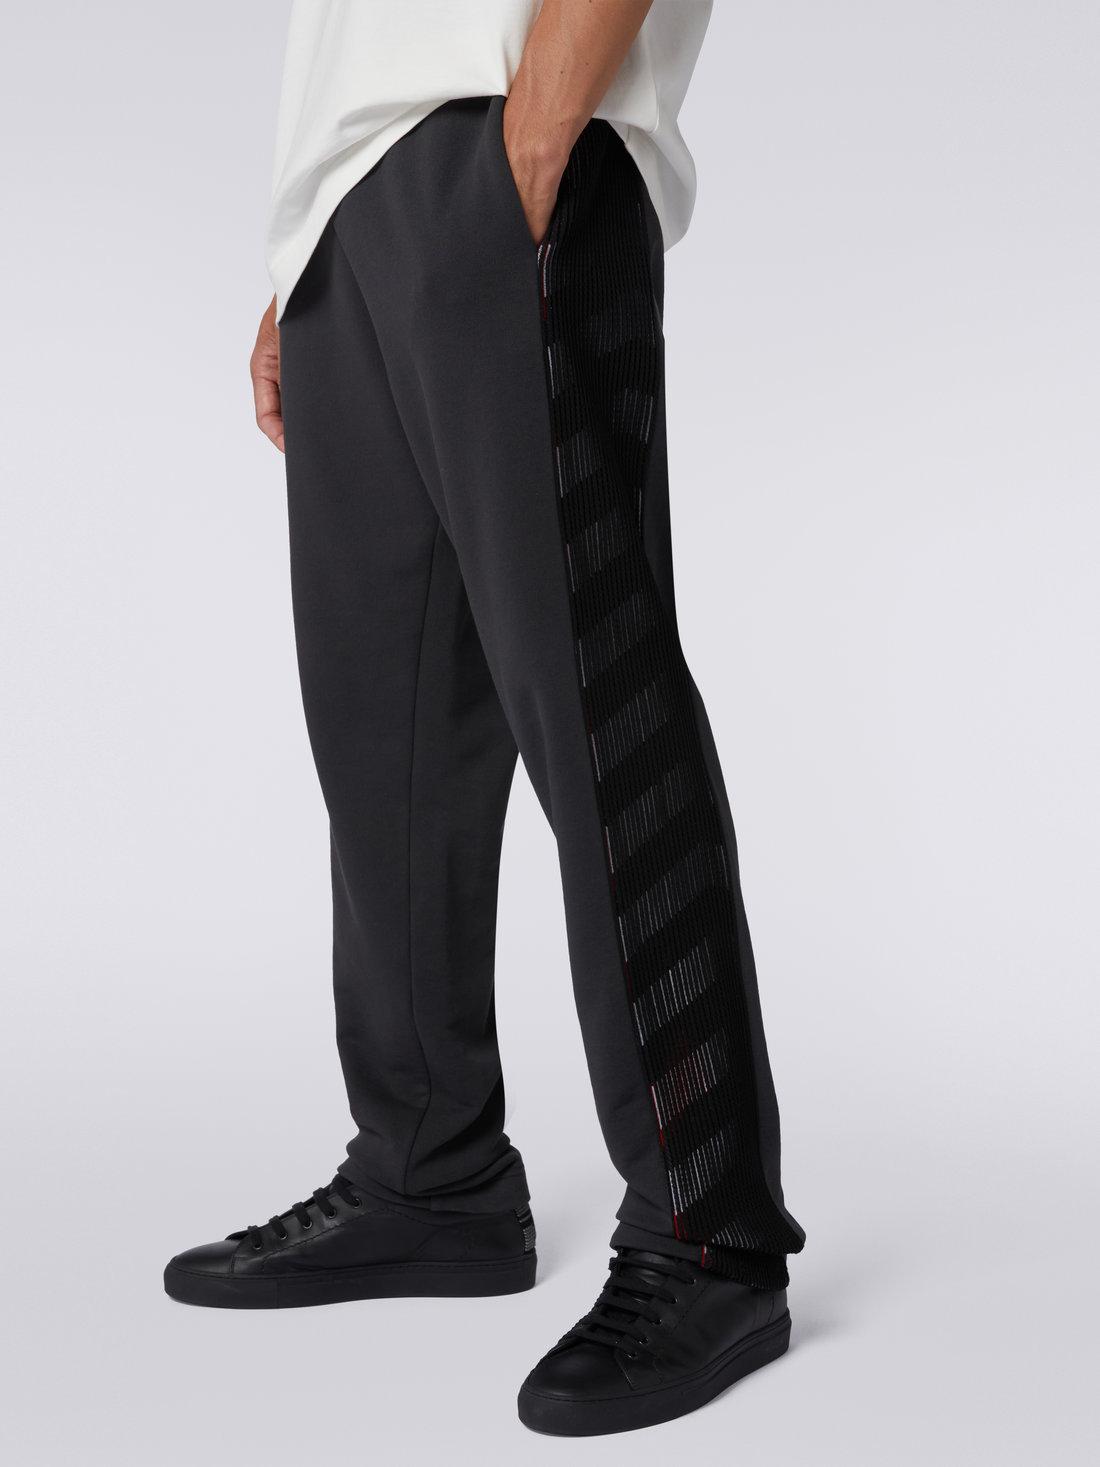 Cotton sports trousers with knitted insert in collaboration with Mike Maignan, Grey - 4